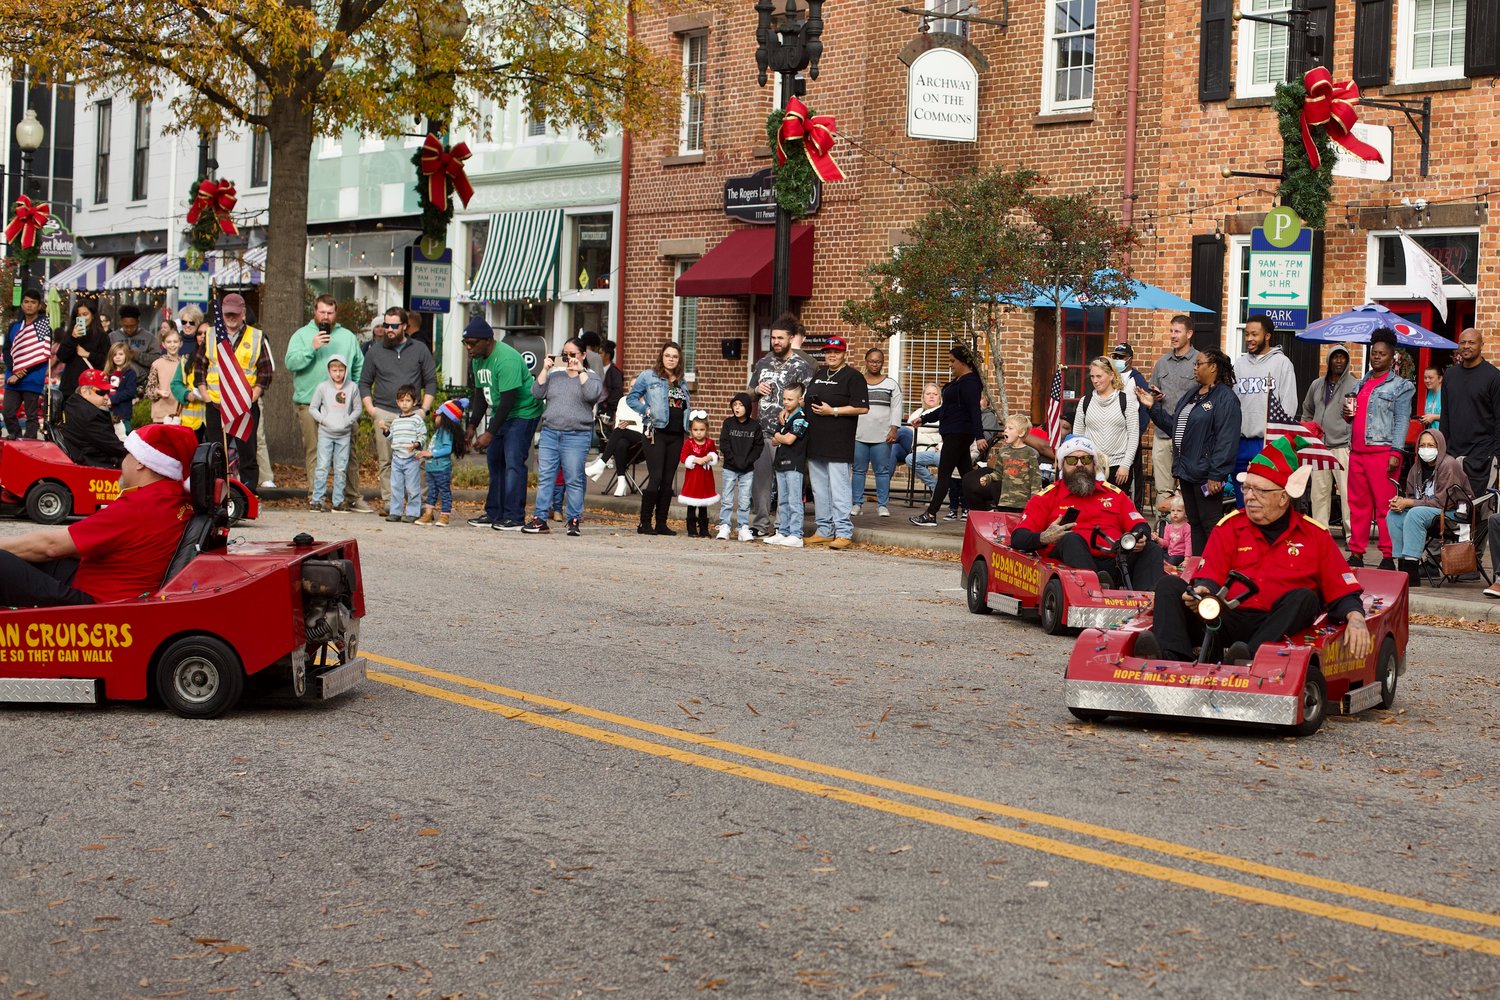 The Fayetteville Rotary Christmas Parade, organized by the Rotary Club of Fayetteville since 1999, took place Saturday in downtown Fayetteville.